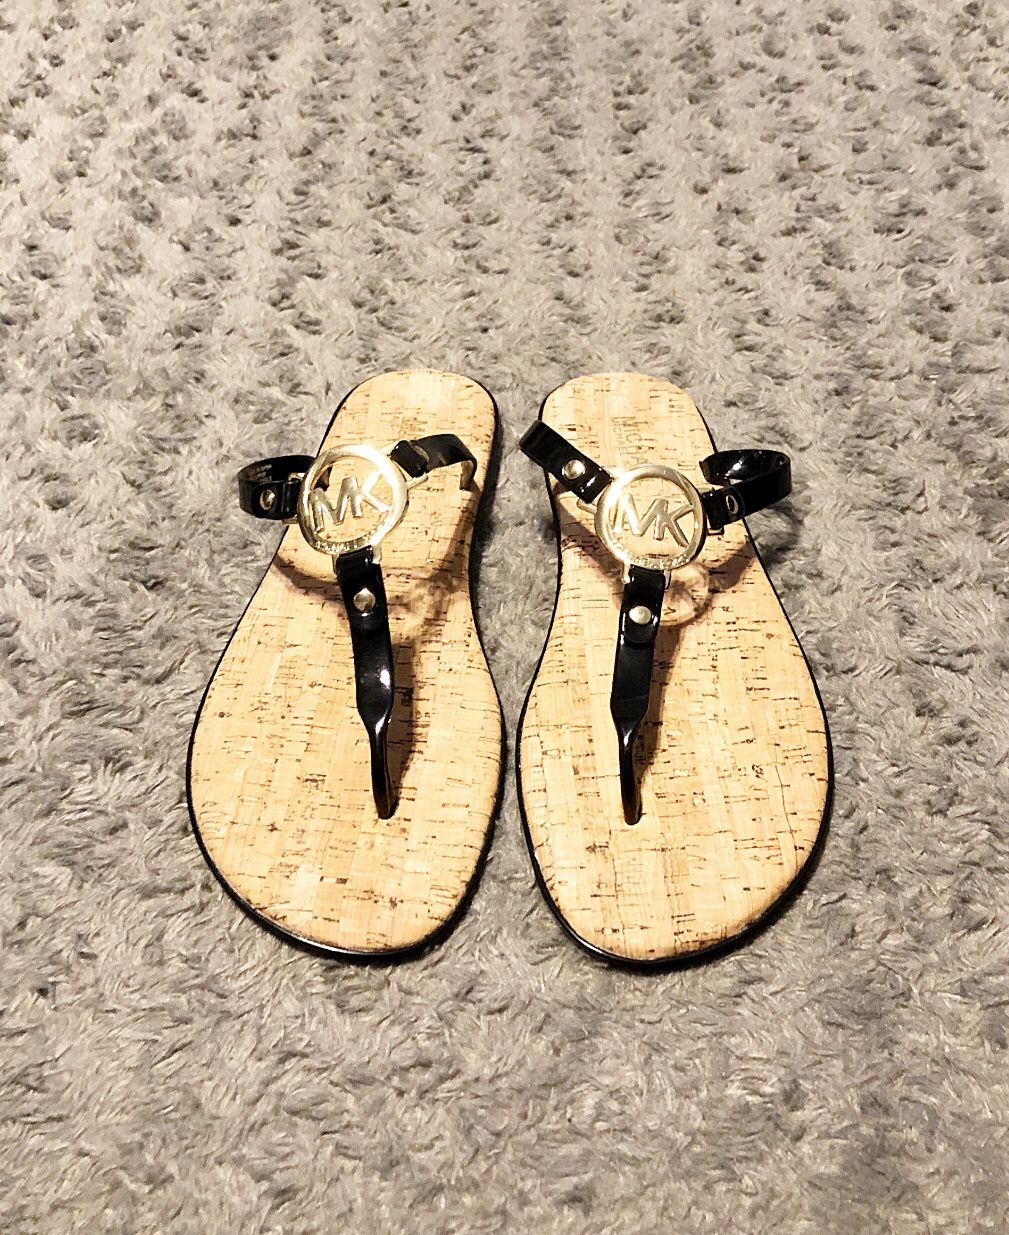 New! Women’s Michael Kors sandals paid $75 size 9 Brand New never worn. Michael Kors Womens MK Charm Jelly Sandal Black with Gold Hardware.